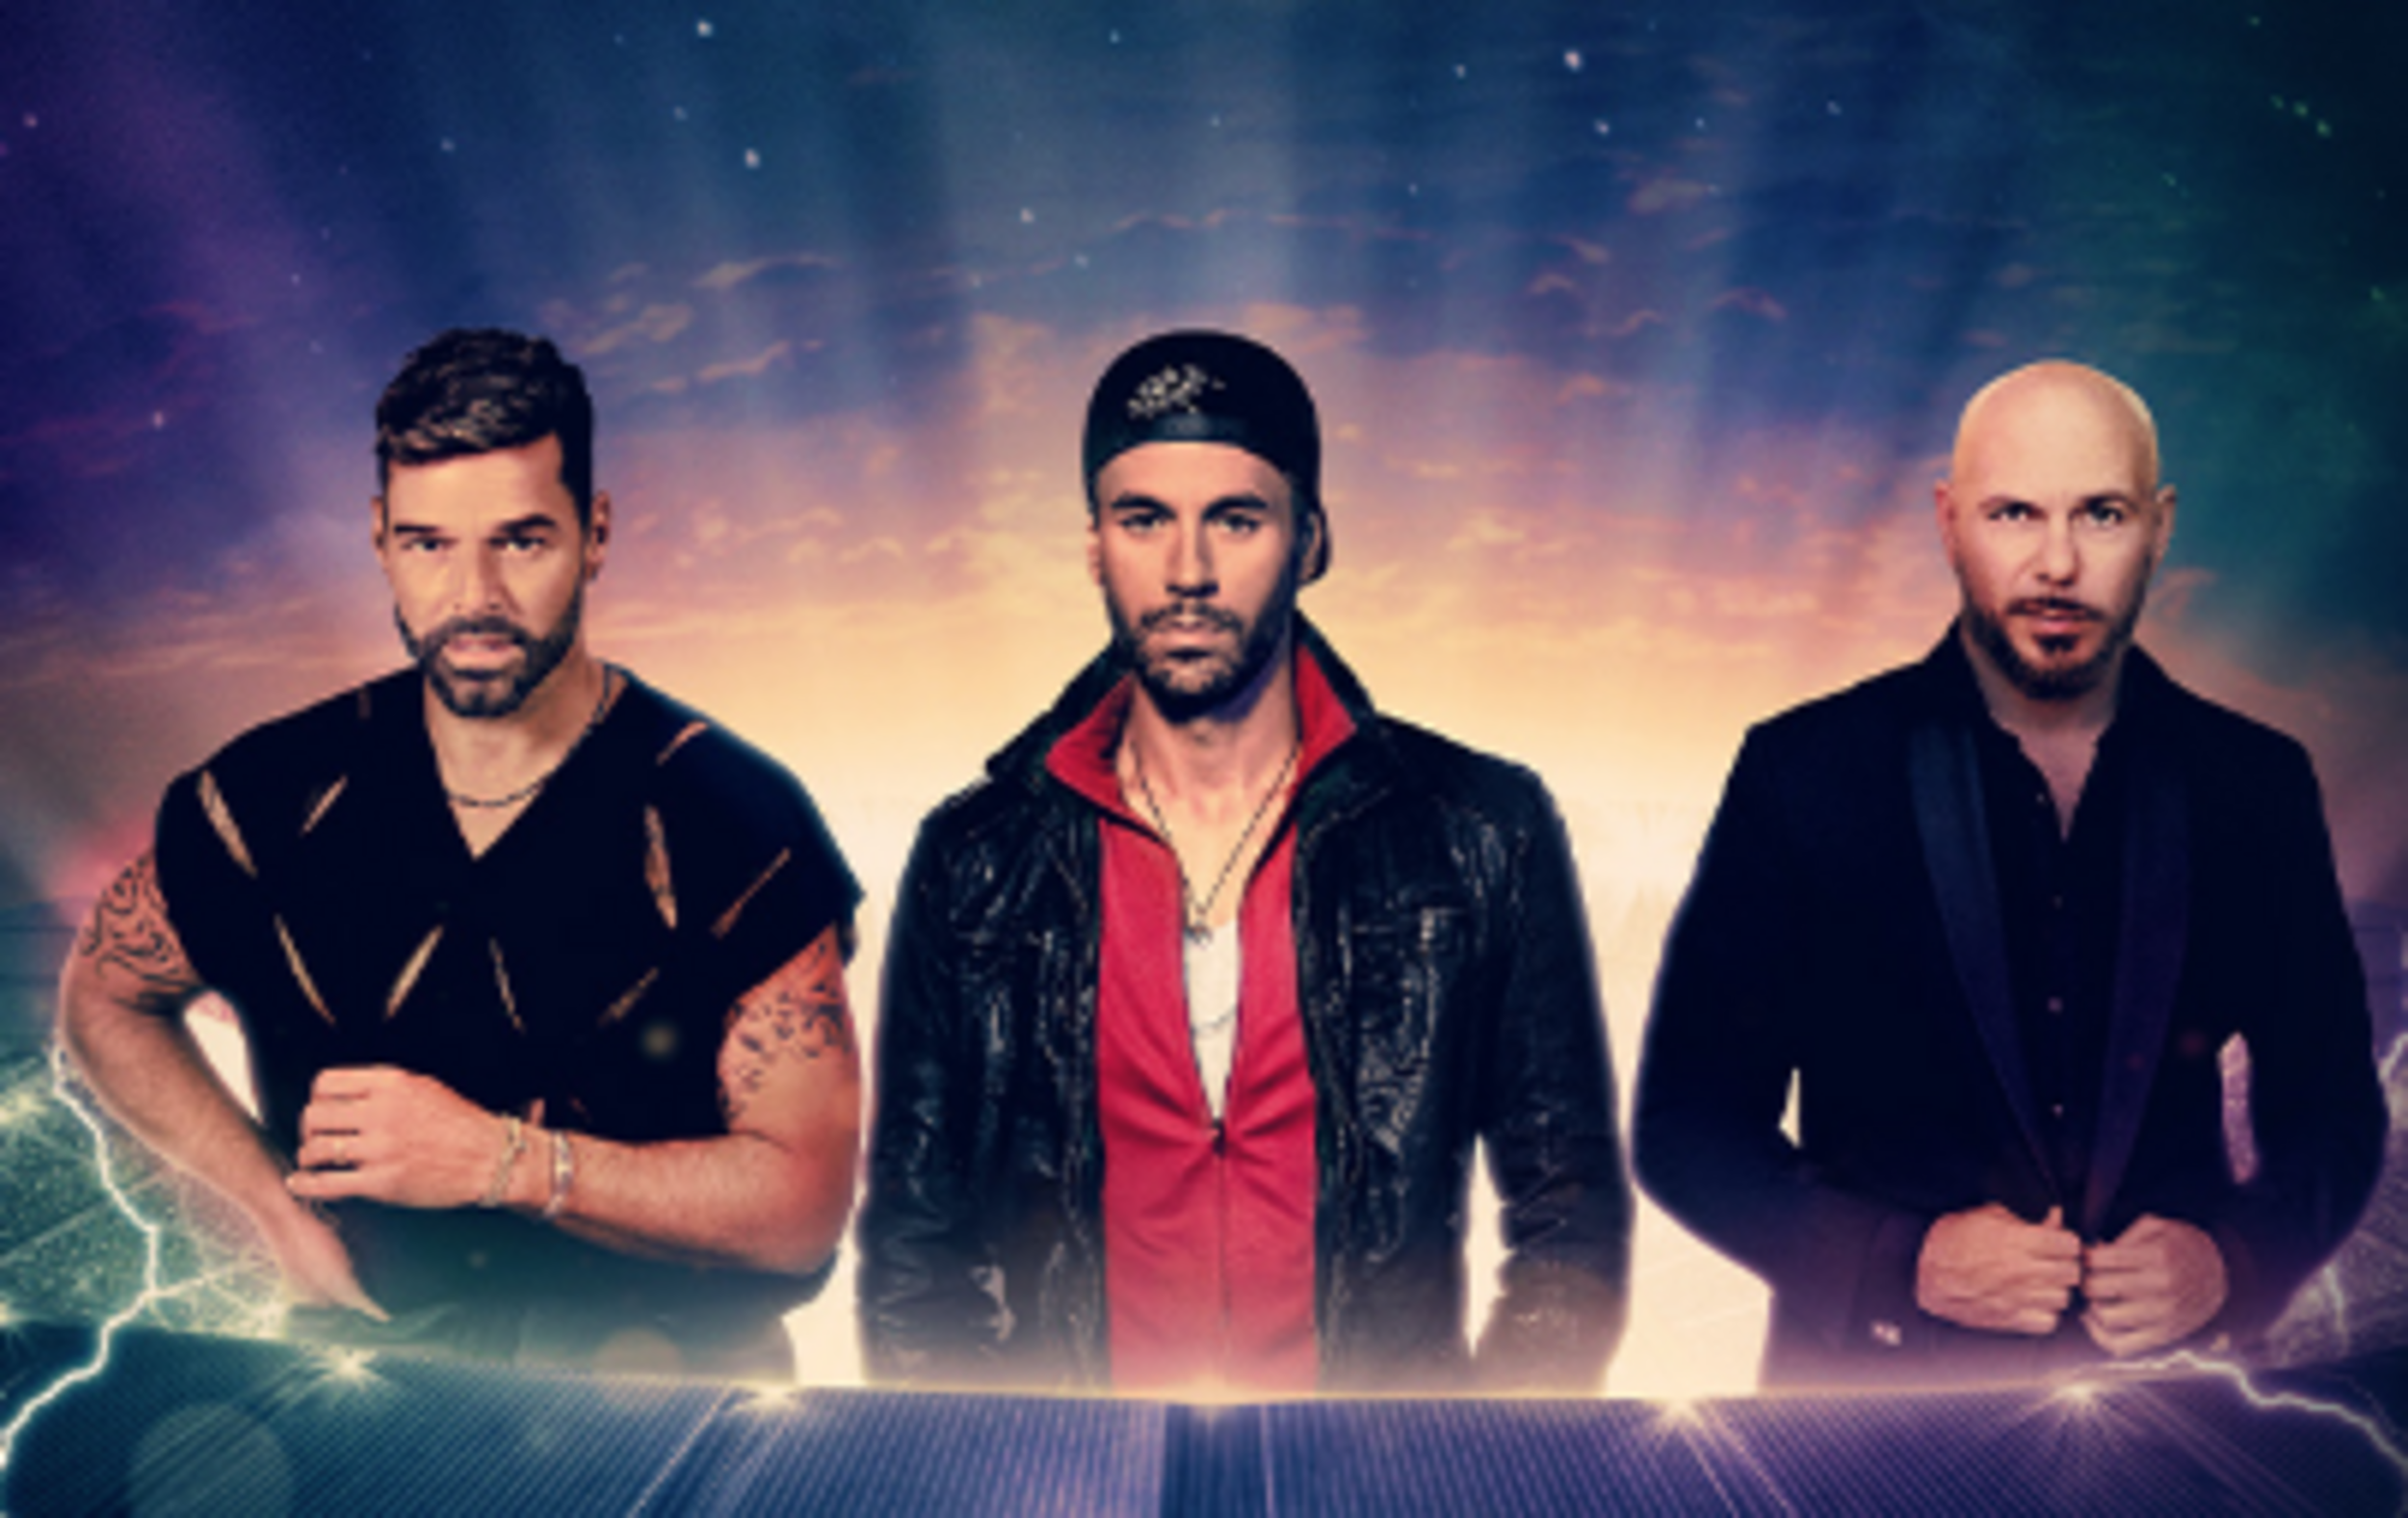 <p>The first of two different concert runs known as "The Trilogy Tour" that we will highlight on this list. In this case, it's three of the biggest multigenerational pop stars in <a href="https://www.google.com/search?q=Enrique+Iglesias%2C+Pitbull+and+Ricky+Martin+2023+tour&sca_esv=596923945&rlz=1C1VDKB_enUS1090US1090&sxsrf=ACQVn09YCg2-UauGOiBZITTyNUXzi6L95Q%3A1704816645289&ei=BXCdZfiVEaSwptQPpq6ZsA0&ved=0ahUKEwi4rLL02NCDAxUkmIkEHSZXBtYQ4dUDCBA&uact=5&oq=4.70+GPA+for+Michigan+State+University&gs_lp=Egxnd3Mtd2l6LXNlcnAiJjQuNzAgR1BBIGZvciBNaWNoaWdhbiBTdGF0ZSBVbml2ZXJzaXR5MgoQABhHGNYEGLADMgoQABhHGNYEGLADMgoQABhHGNYEGLADMgoQABhHGNYEGLADMgoQABhHGNYEGLADMgoQABhHGNYEGLADMgoQABhHGNYEGLADMgoQABhHGNYEGLADSOEJUABYAHABeACQAQCYAaQFoAGkBaoBAzUtMbgBA8gBAOIDBBgAIEGIBgGQBgg&sclient=gws-wiz-serp#fpstate=ive&vld=cid:fd13338f,vid:9MdBT_WiPSE,st:0">Enrique Iglesias, Pitbull and Ricky Martin.</a> The first leg of the tour, from 2023 drew rave reviews, notably for the immense talent that these three high-energy performers possess. For, 2024, the trio is back on the road with 18 scheduled U.S. dates, beginning Jan, 30 in Fresno, Calif. The tour will run through early March. </p><p>You may also like: <a href='https://www.yardbarker.com/entertainment/articles/bets_picture_the_25_greatest_gambling_movies/s1__36148310'>Bets picture: The 25 greatest gambling movies</a></p>